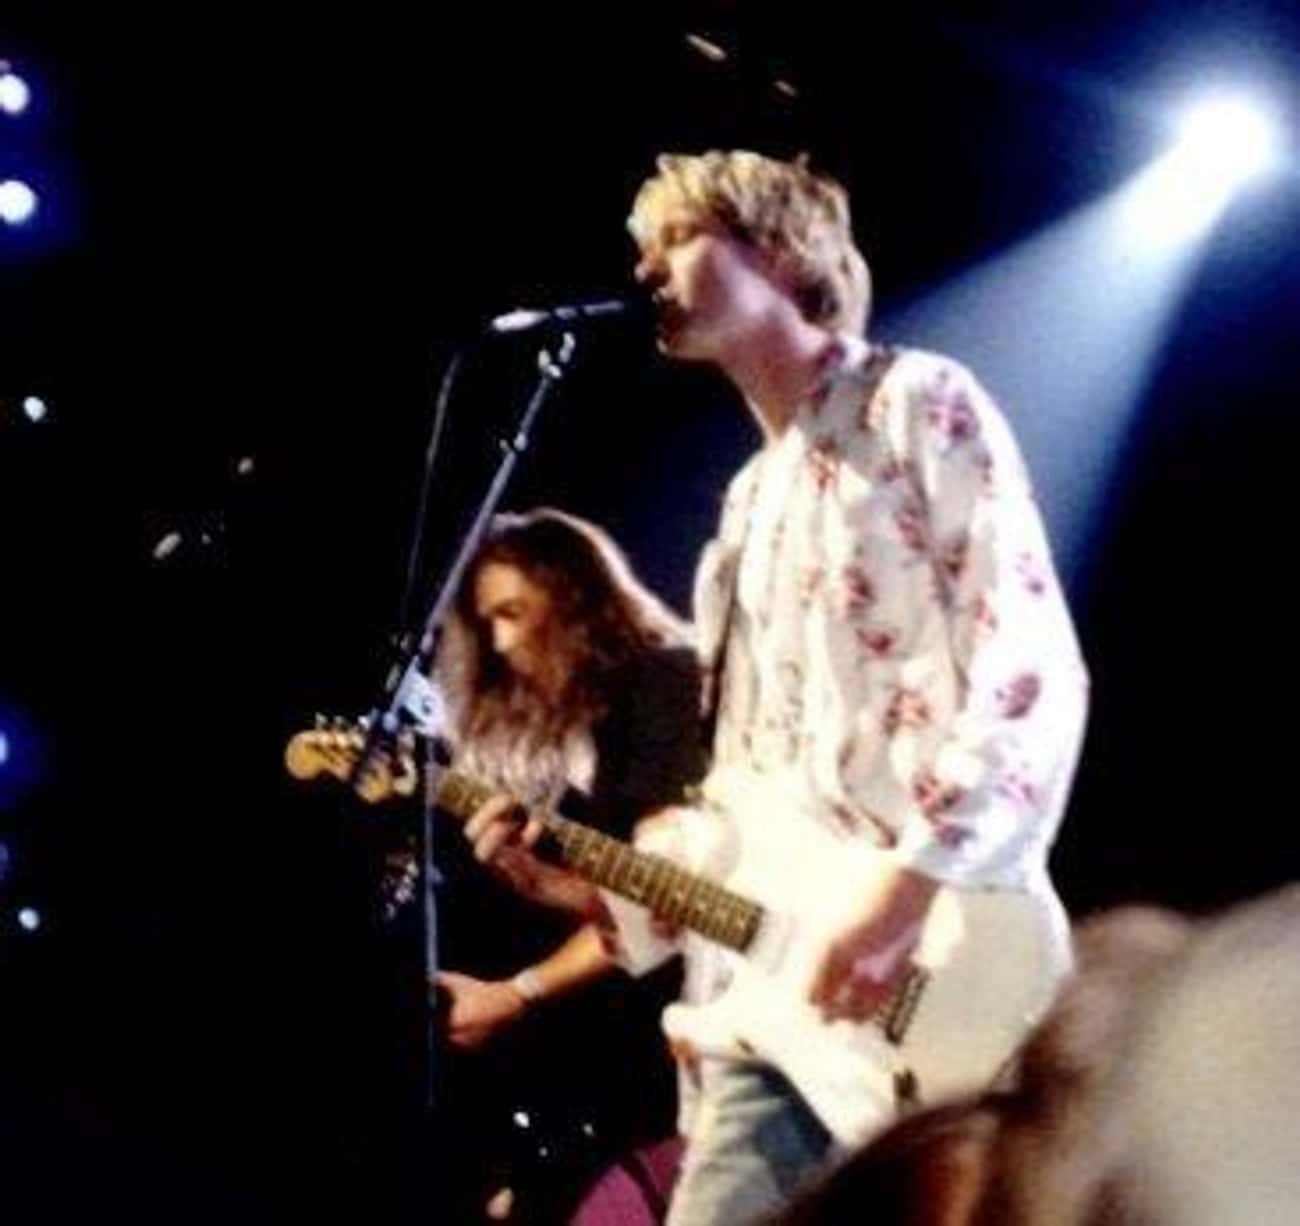 Cobain Said He Was Trying To Emulate The Pixies When He Wrote ‘Smells Like Teen Spirit’ 